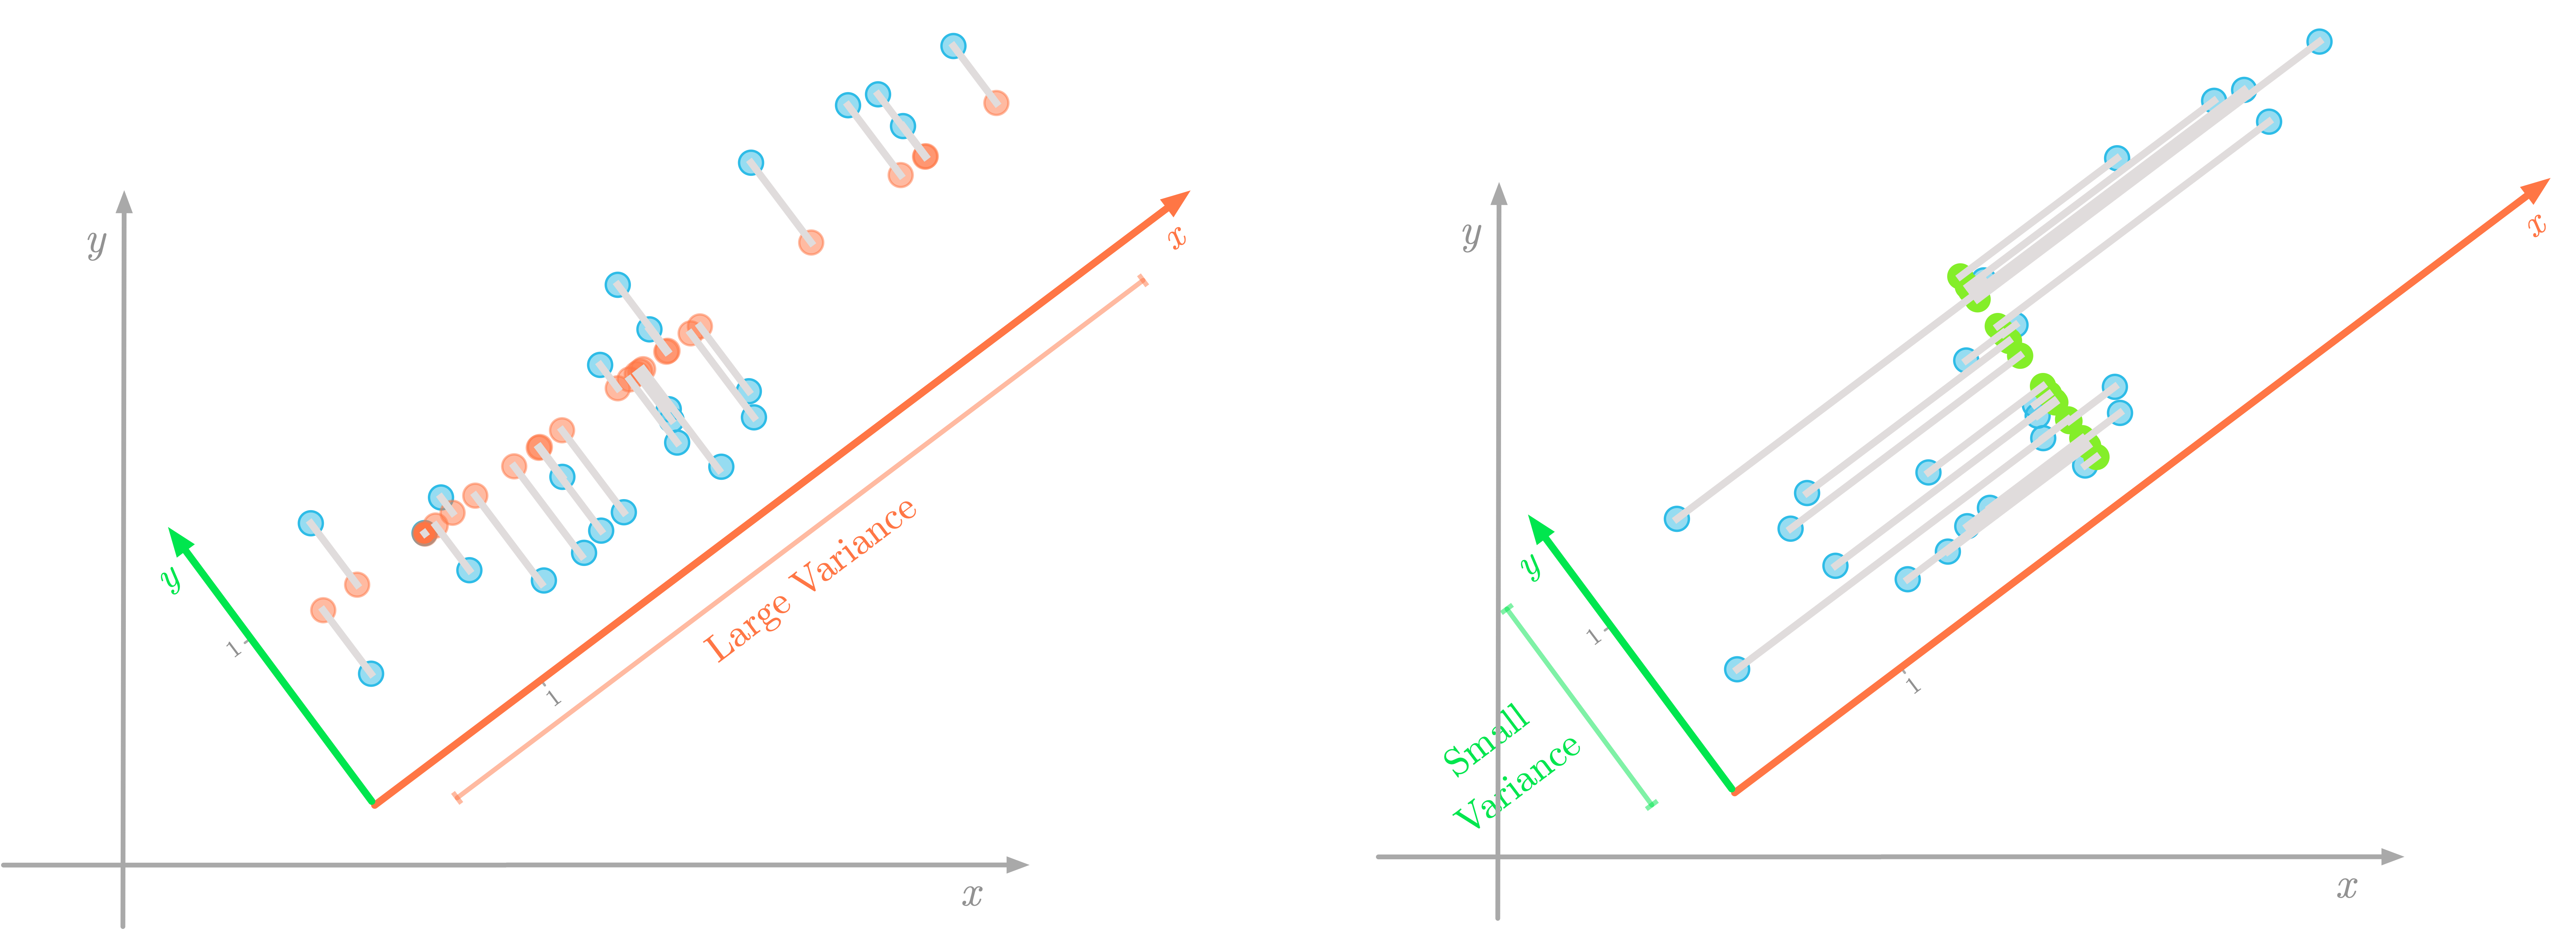 Figure 5: The direction that maximizes the variance is also the one associated with the smallest error (represented in gray).